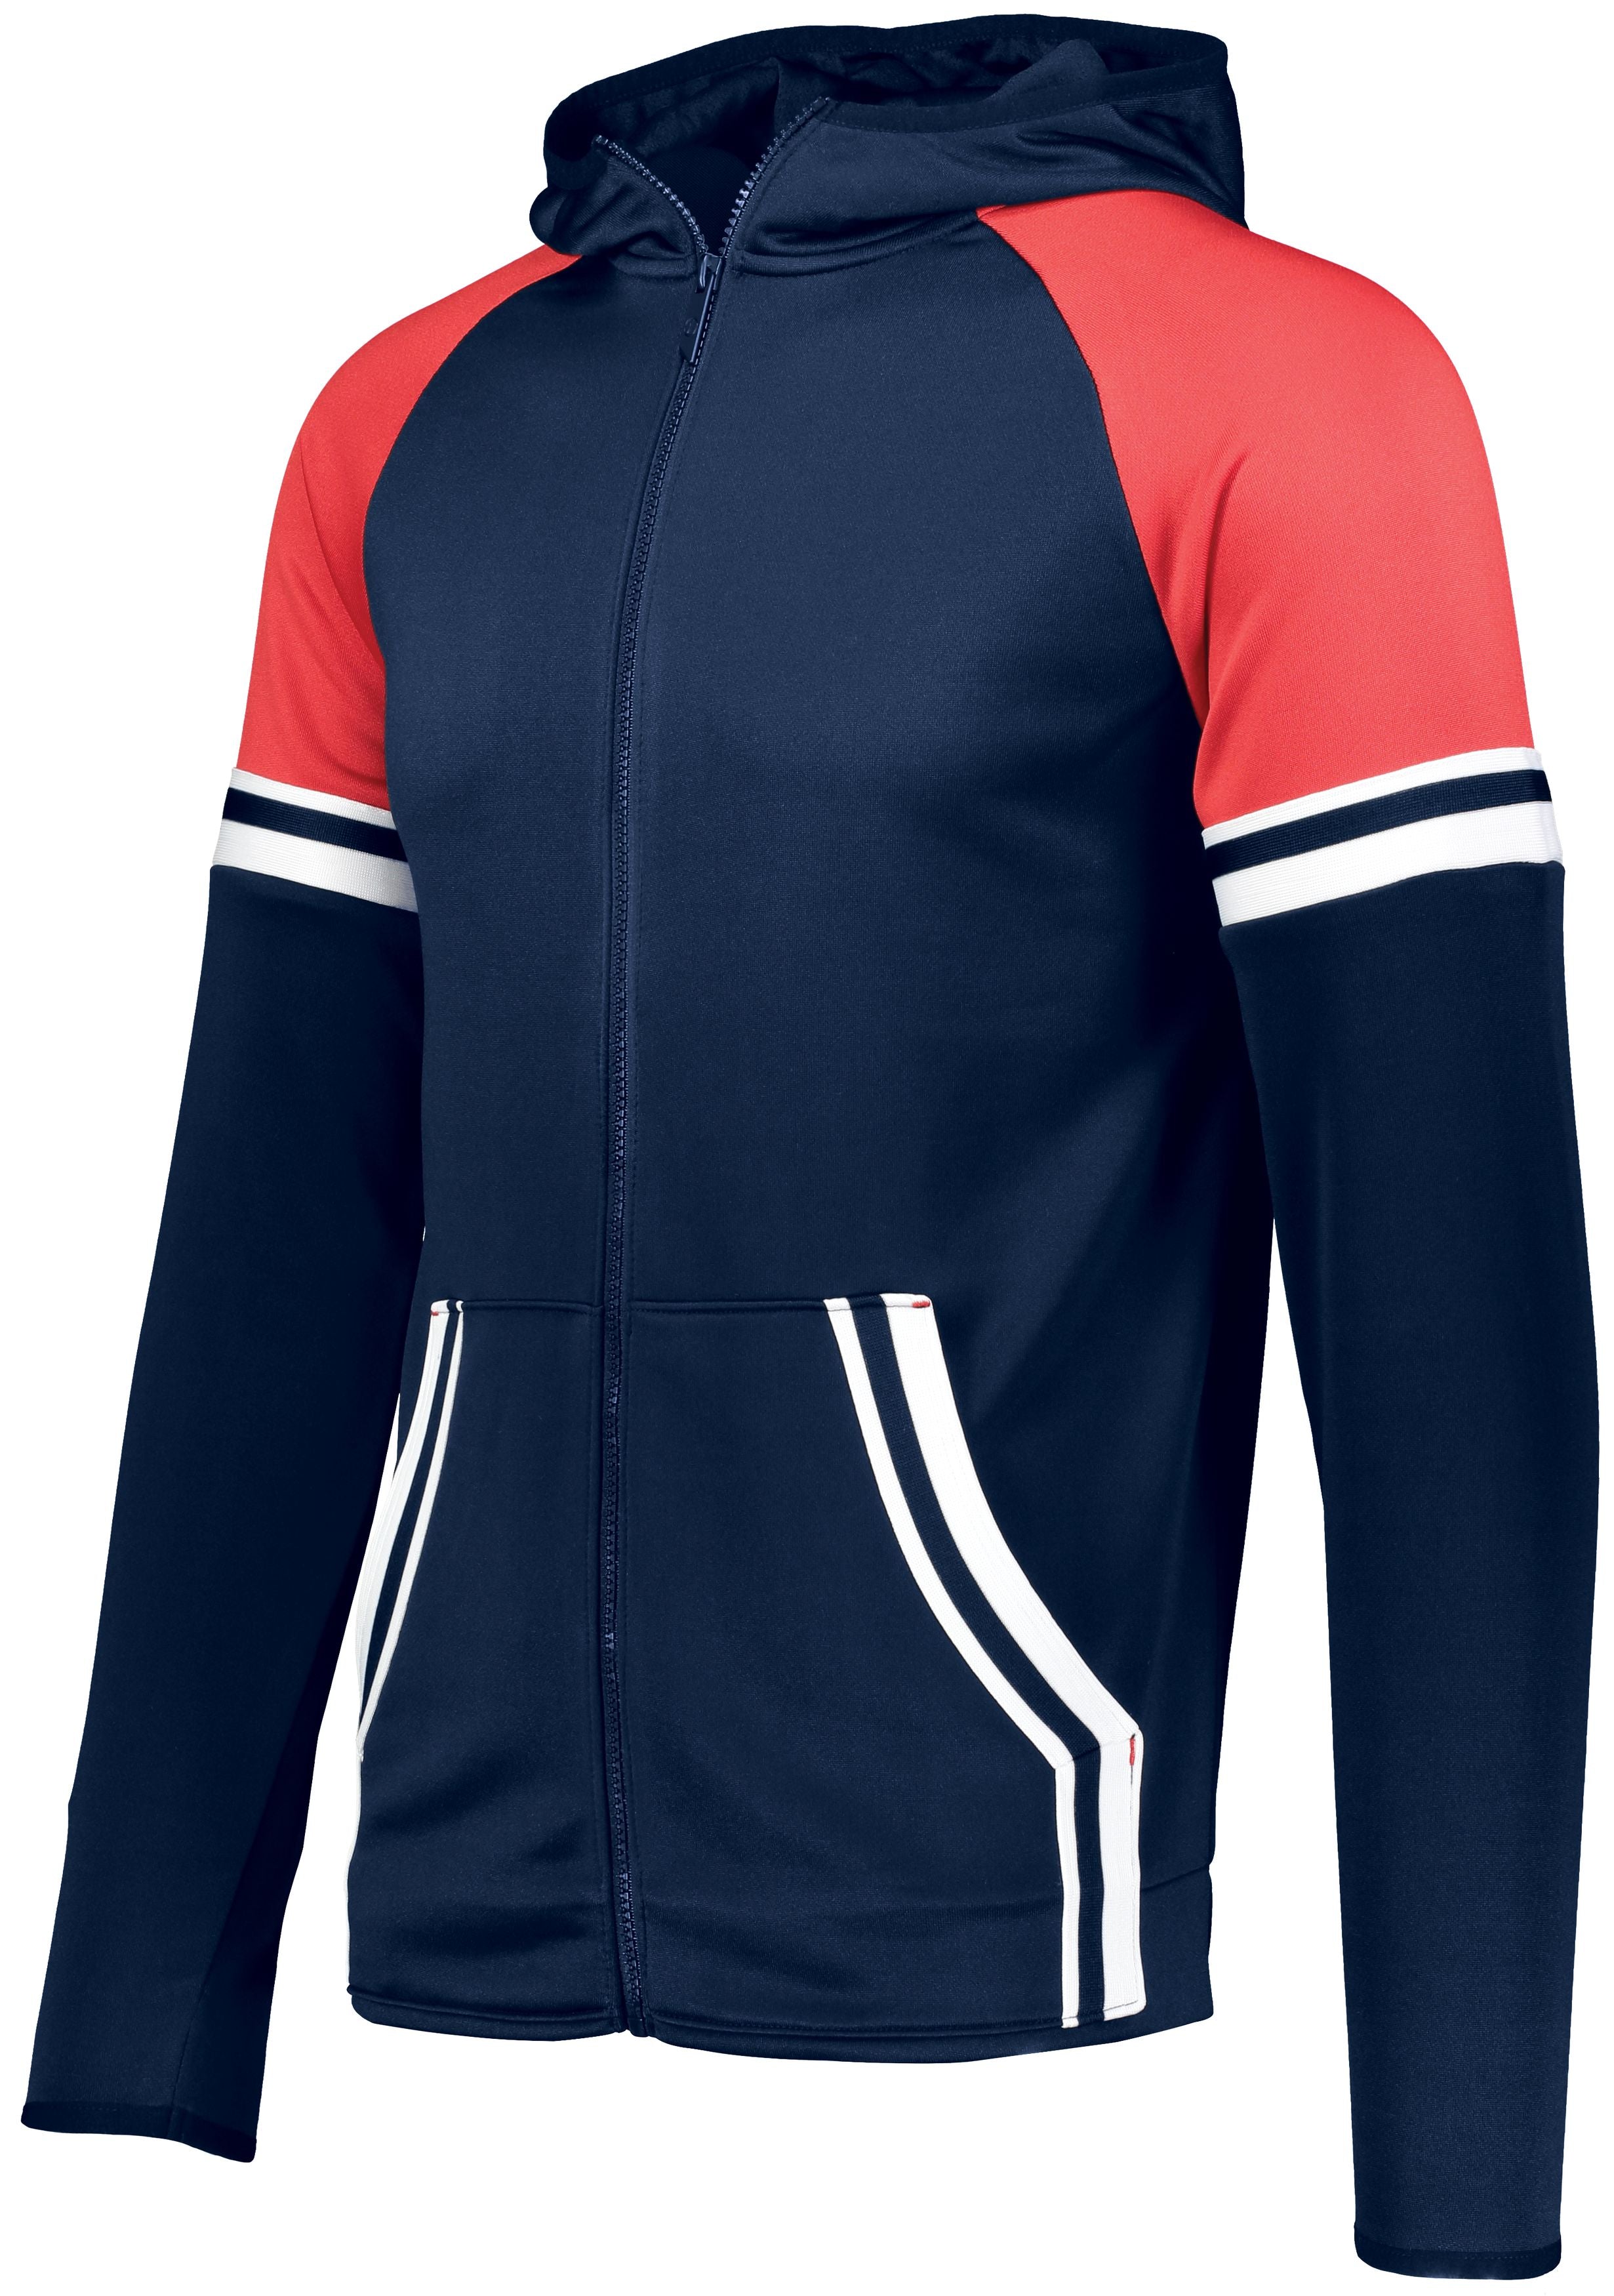 Holloway Retro Grade Jacket in Navy/Scarlet  -Part of the Adult, Adult-Jacket, Holloway, Outerwear product lines at KanaleyCreations.com